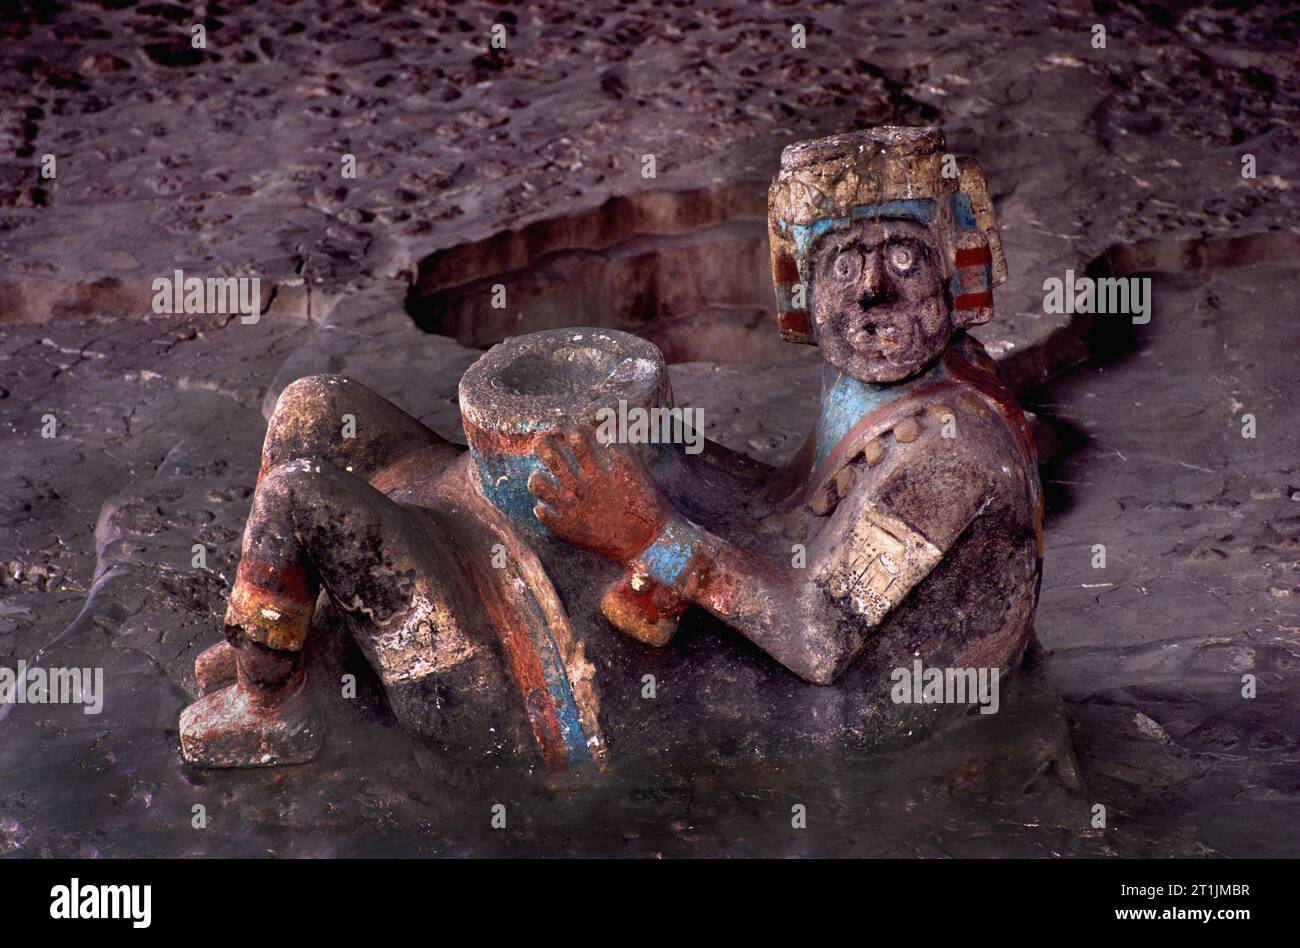 Polychrome Chac-Mool Figure at The Templo Mayor Museum -National Anthropological Museum Mexico City Polychrome Chac mool figure on display at the Museo del Templo Mayor, Mexico City Stock Photo